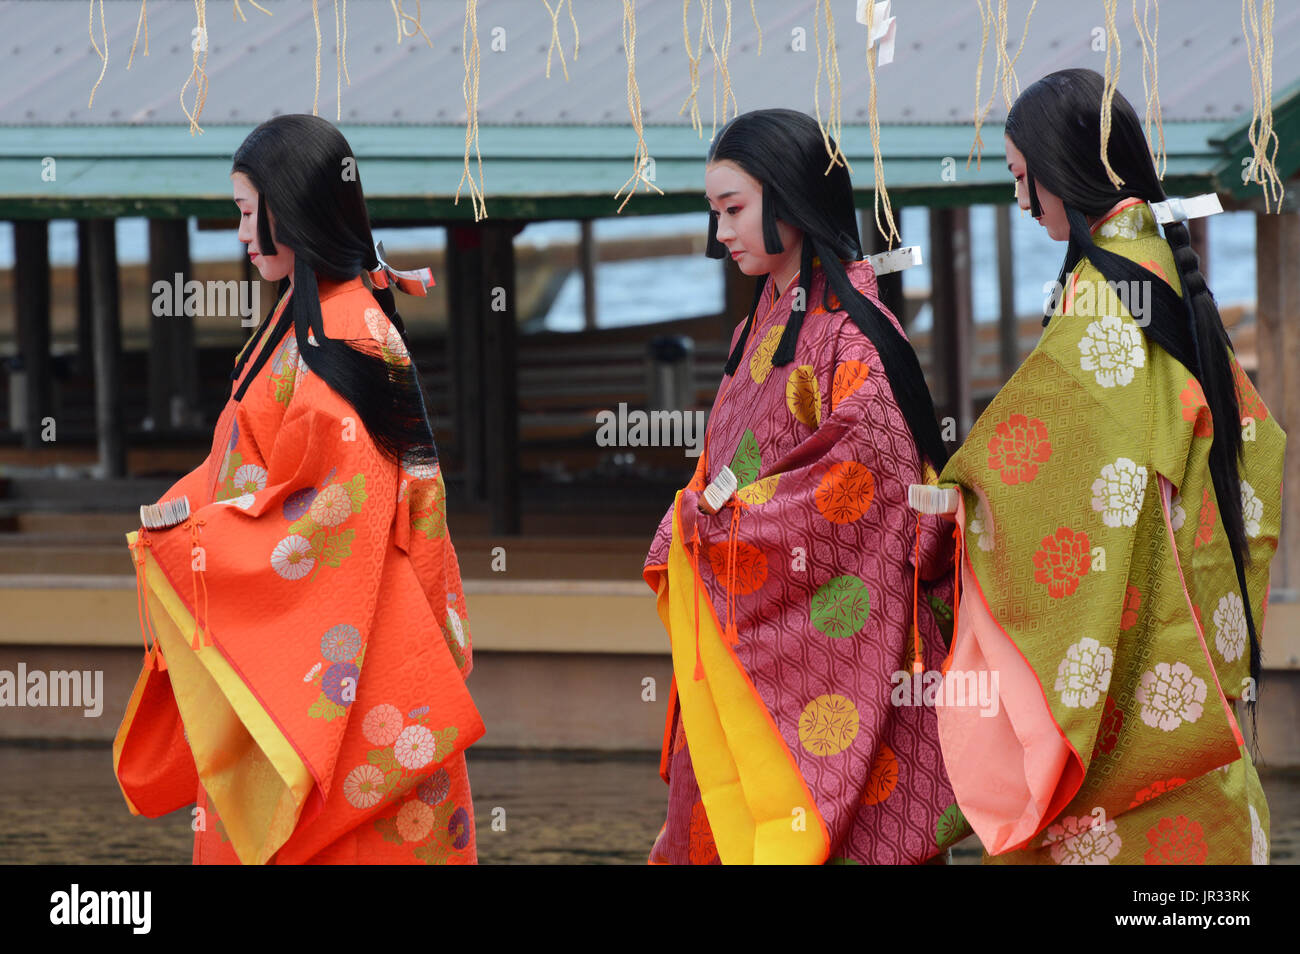 KYOTO, JAPAN - OCTOBER 16, 2016 - Japanese women in colorful traditional clothing take part in the Saigu Procession festival in Kyoto Stock Photo